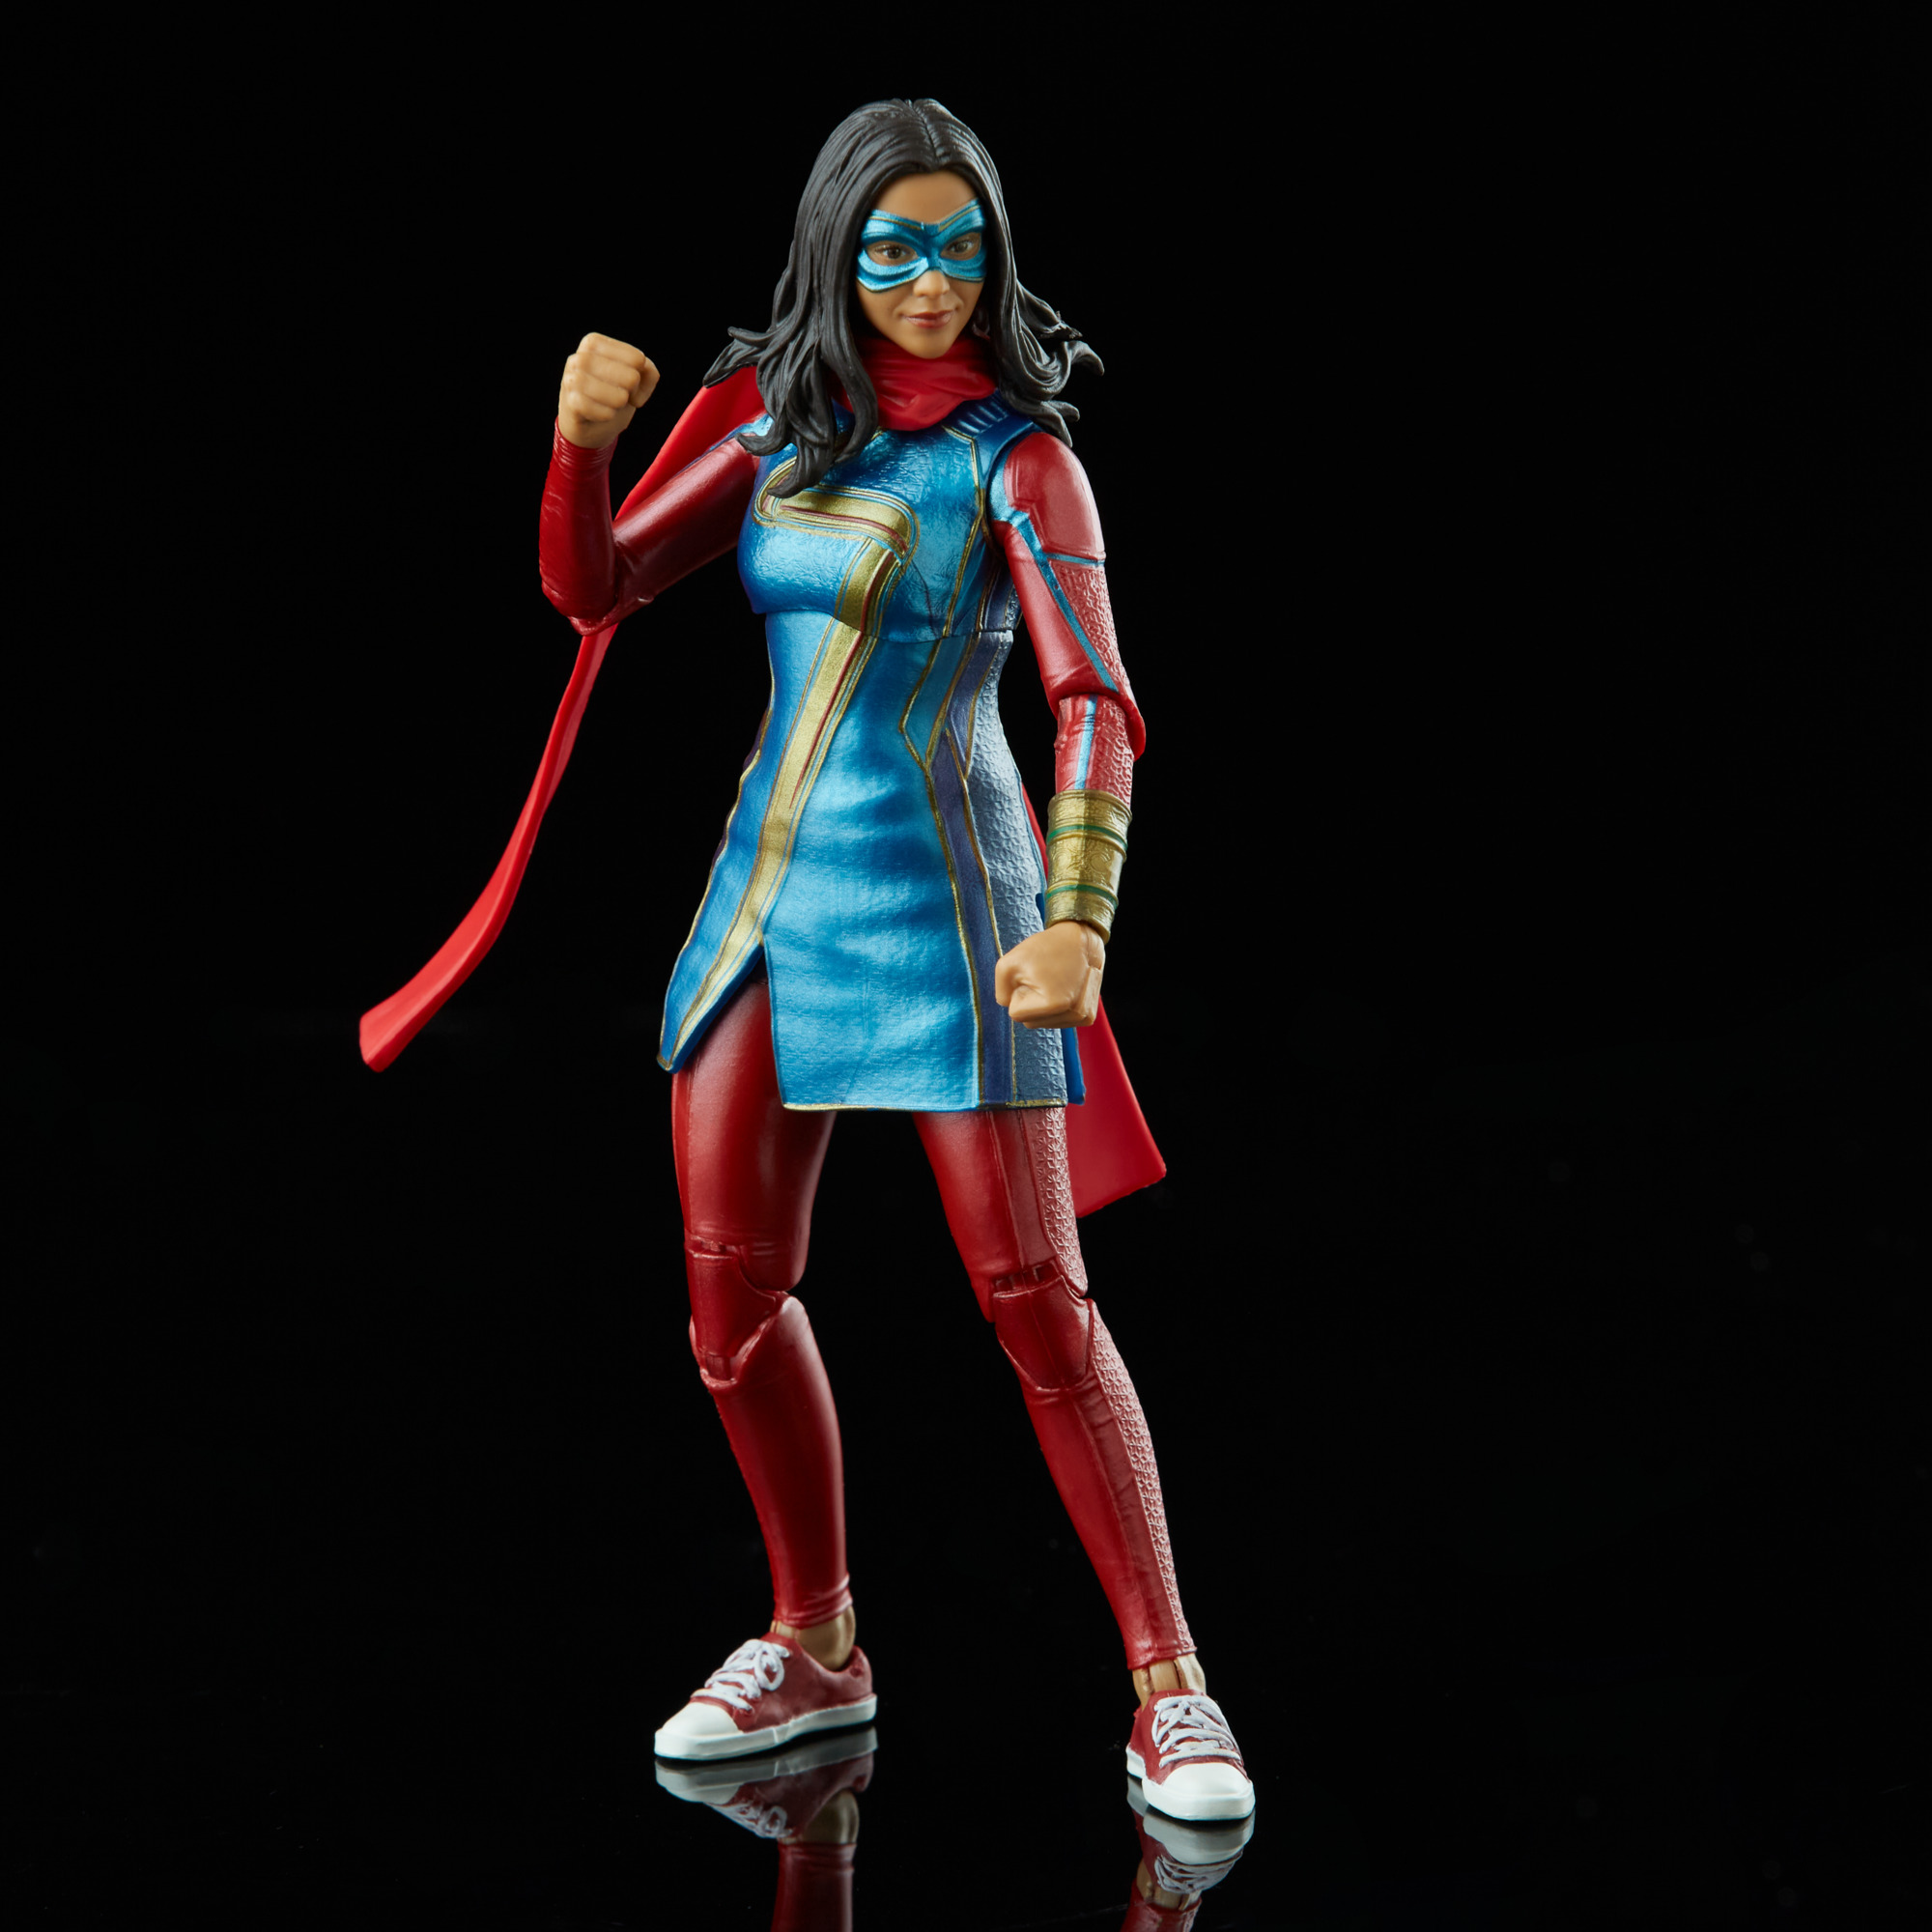 Ms Marvel action figure